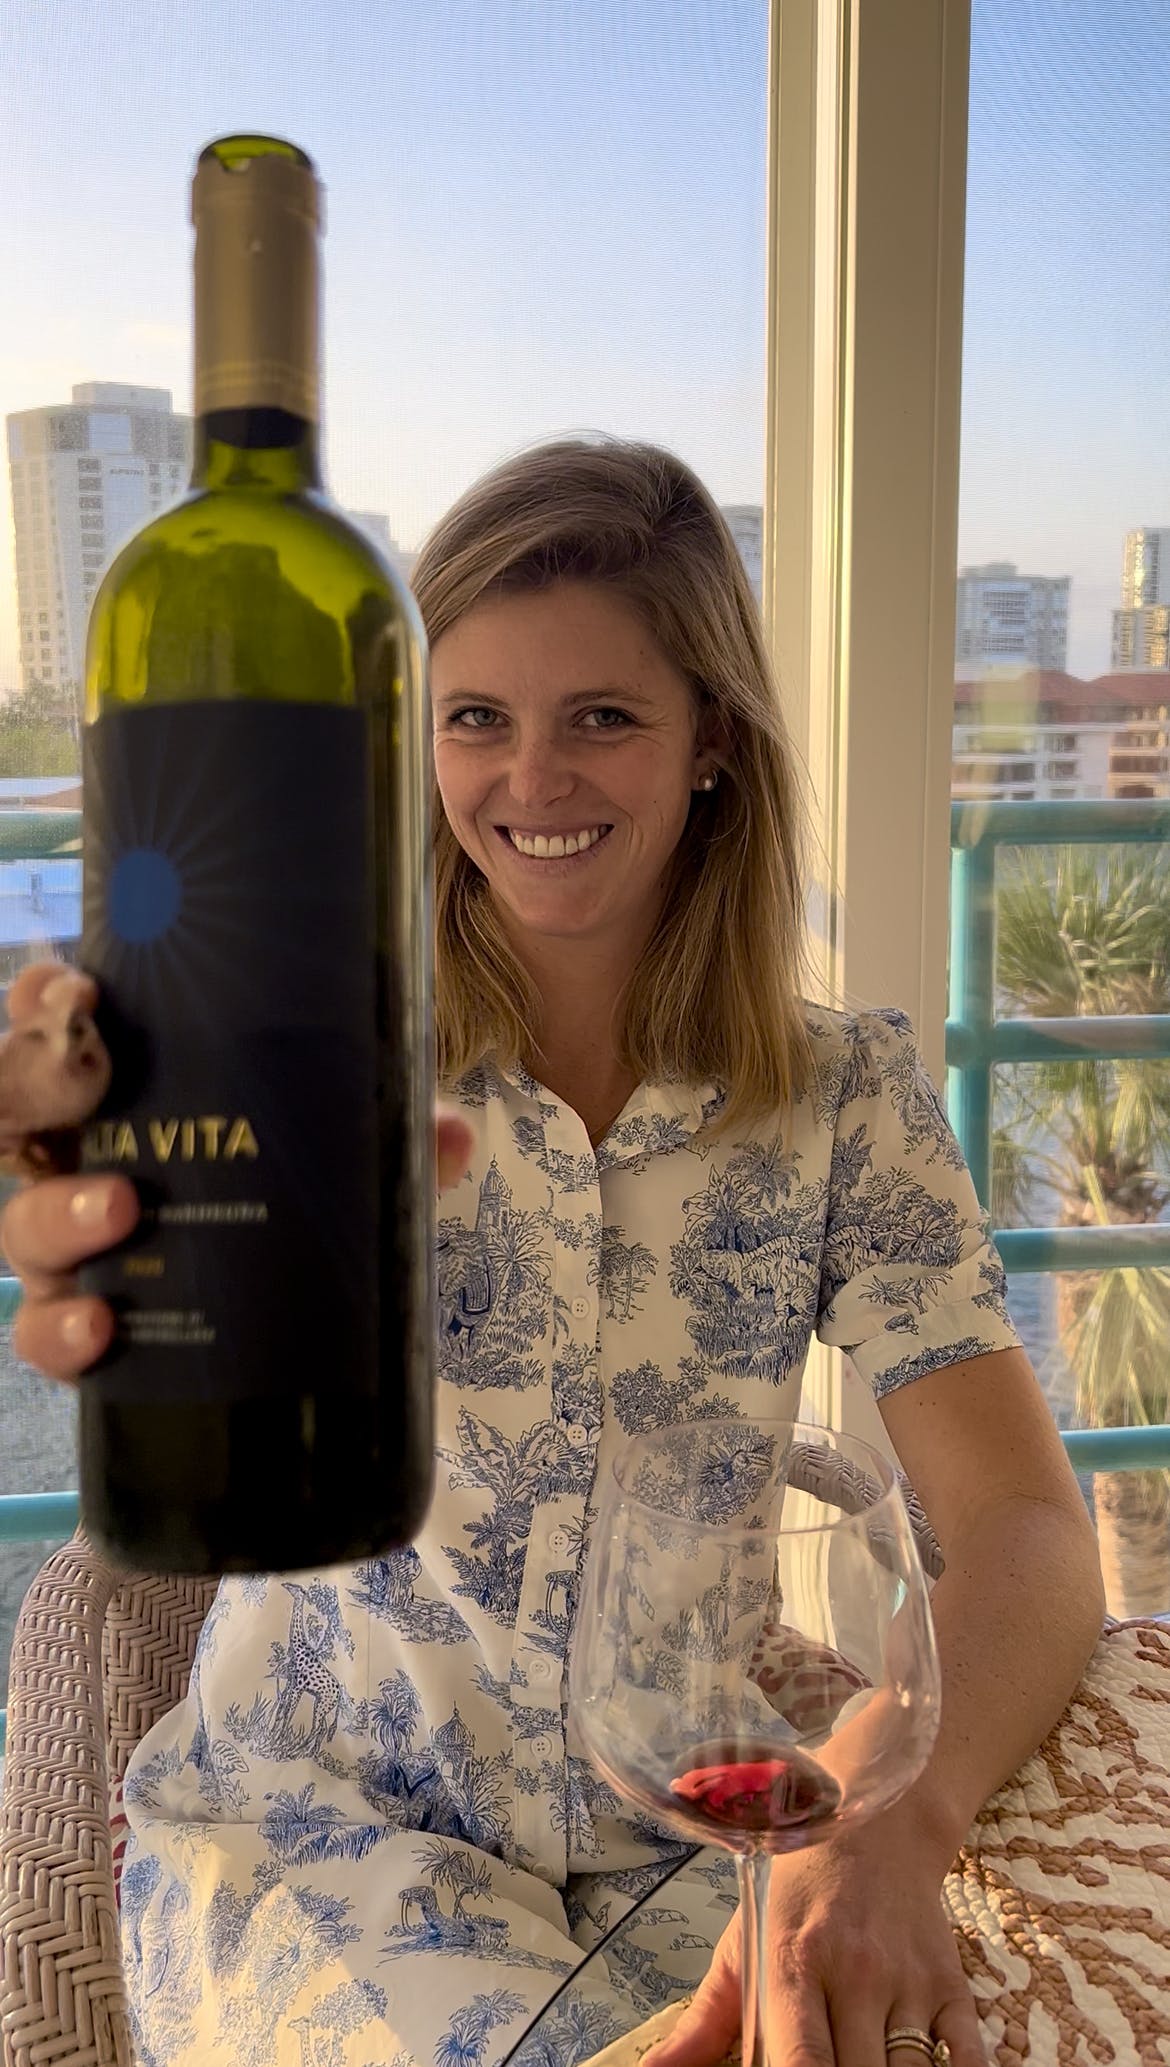 Chef Anja smiling holding up a bottle of red wine